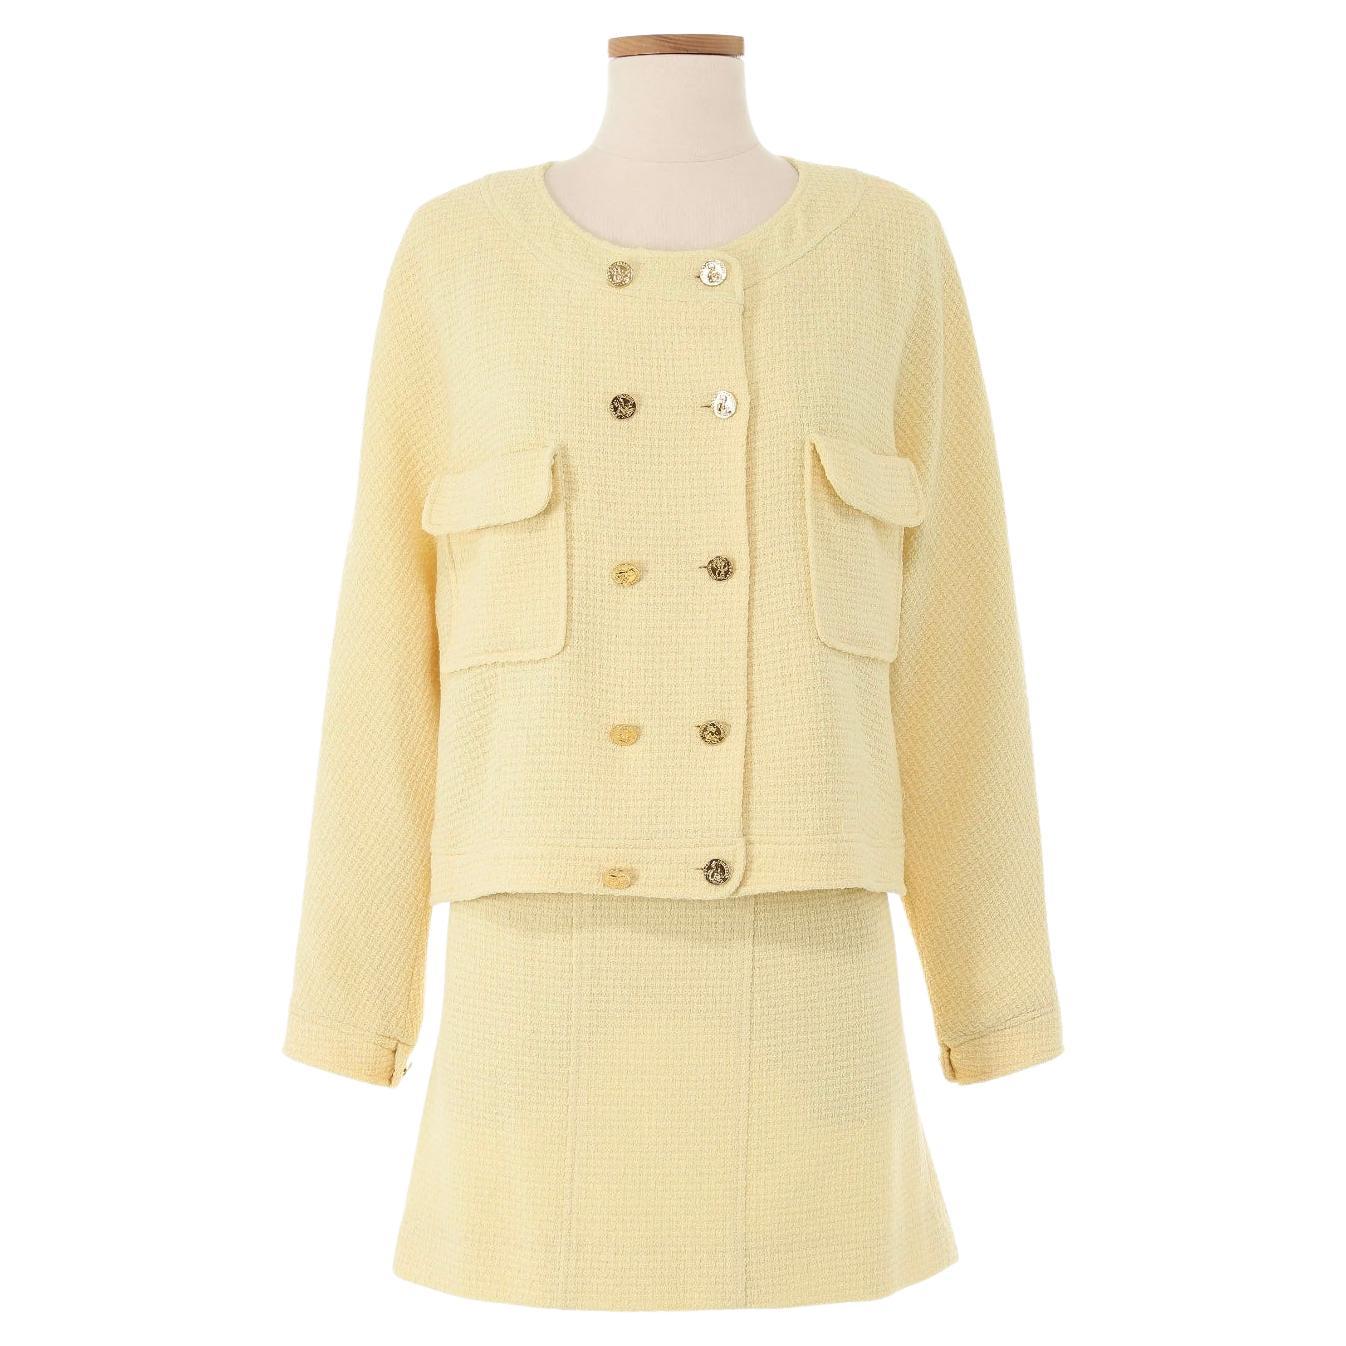 Chanel Yellow Tweed Skirt Suit with Gold Buttons For Sale